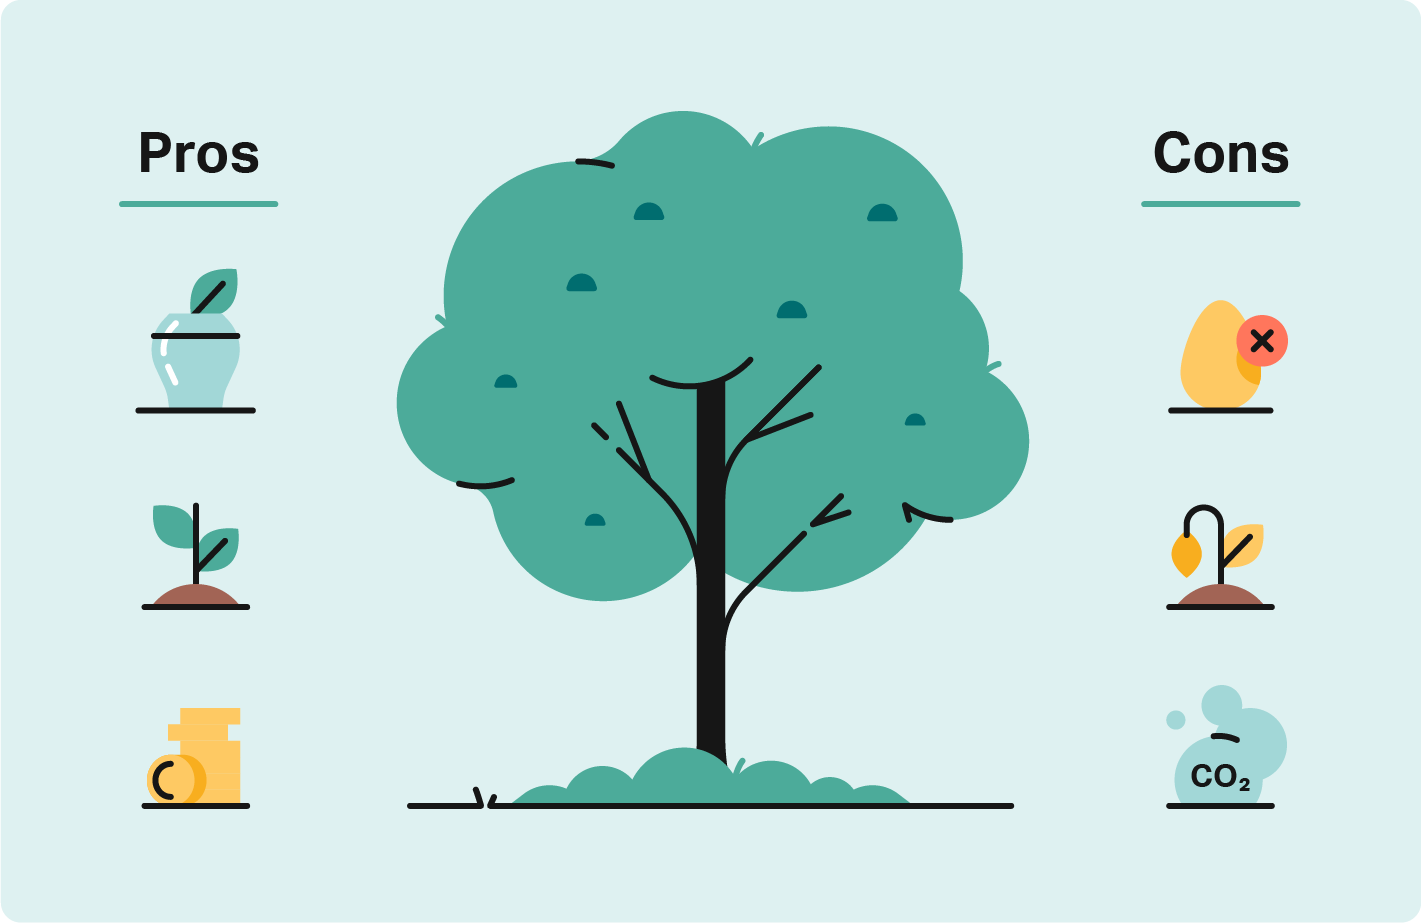 A tree illustration is surrounded by icons representing the pros and cons of tree pod burials. 